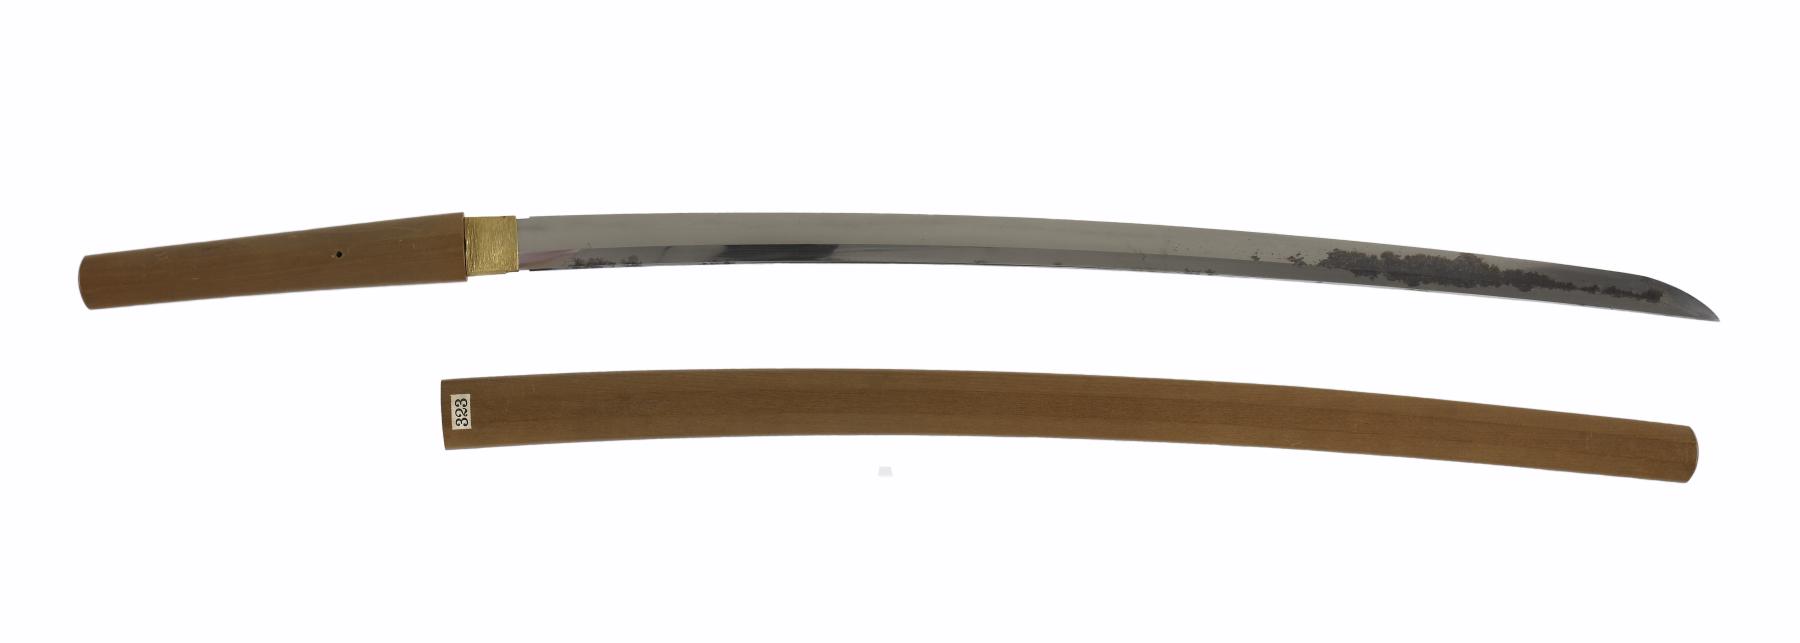 Image for Unmounted katana blade attributed to the Soshu school